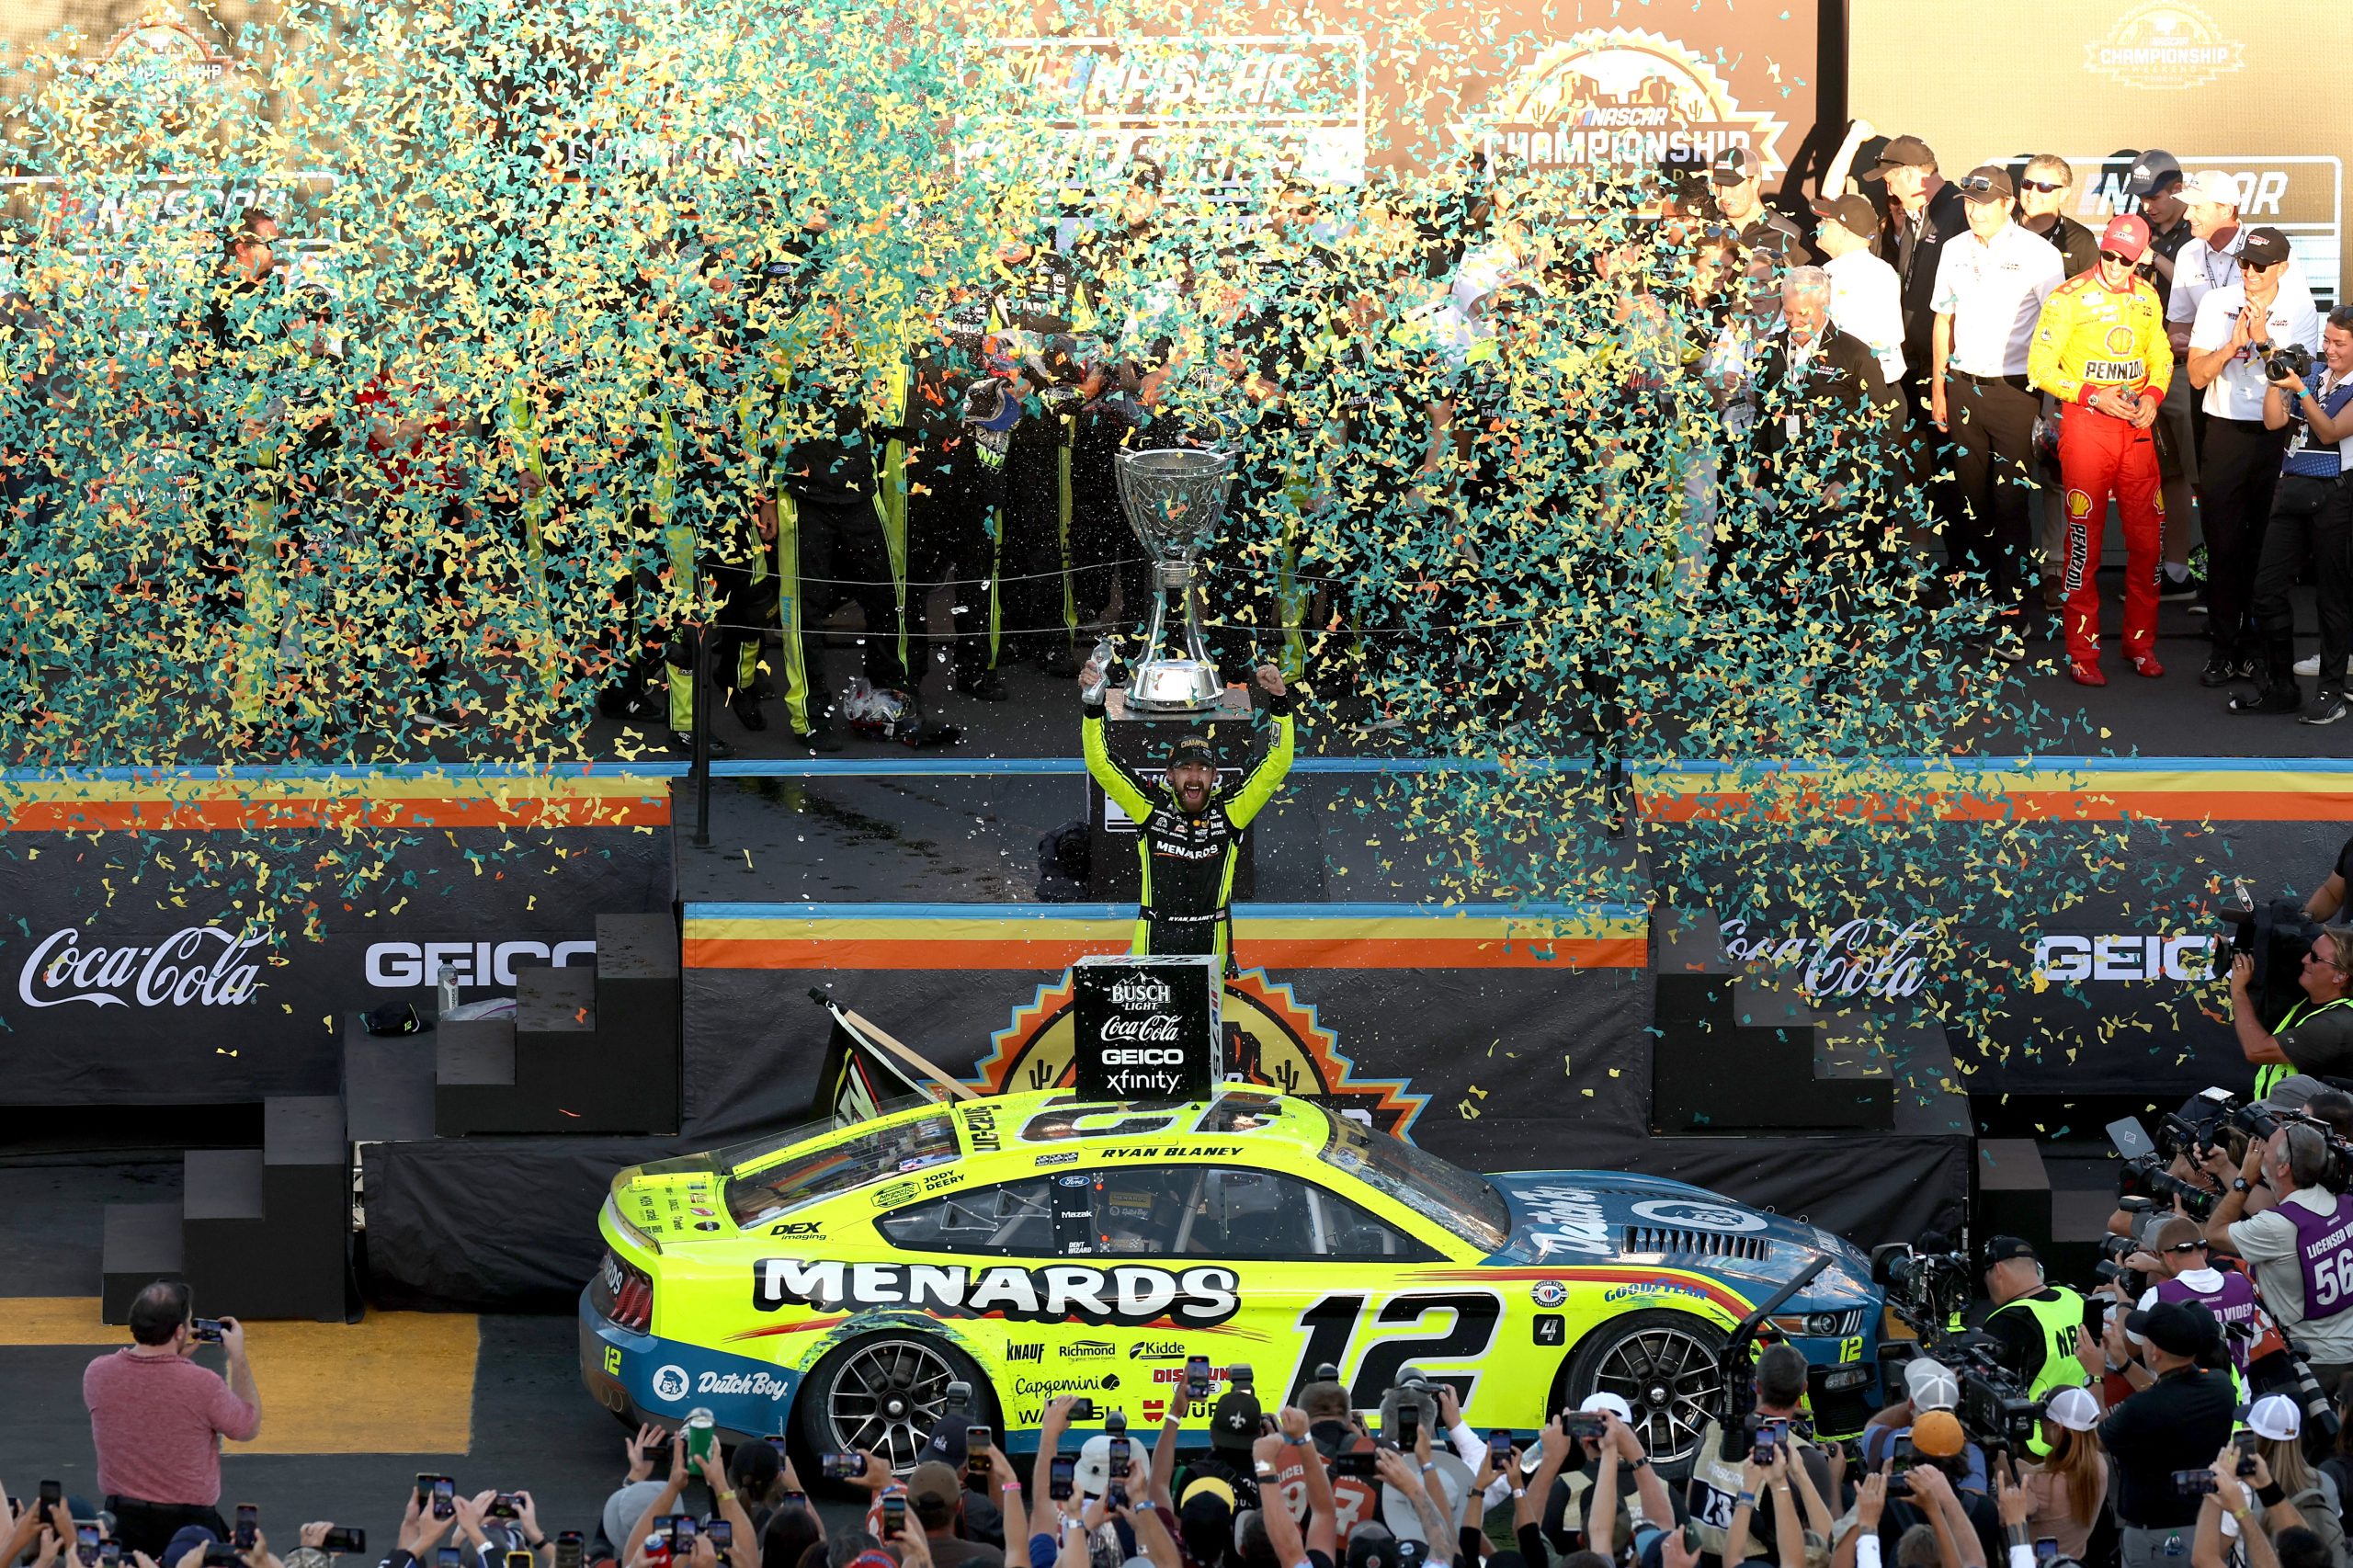 Ryan Blaney, driver of the #12 Menards/Dutch Boy Ford, celebrates in victory lane after winning the 2023 NASCAR Cup Series Championship, finishing first of the Championship 4 drivers in the NASCAR Cup Series Championship race at Phoenix Raceway on November 05, 2023 in Avondale, Arizona.